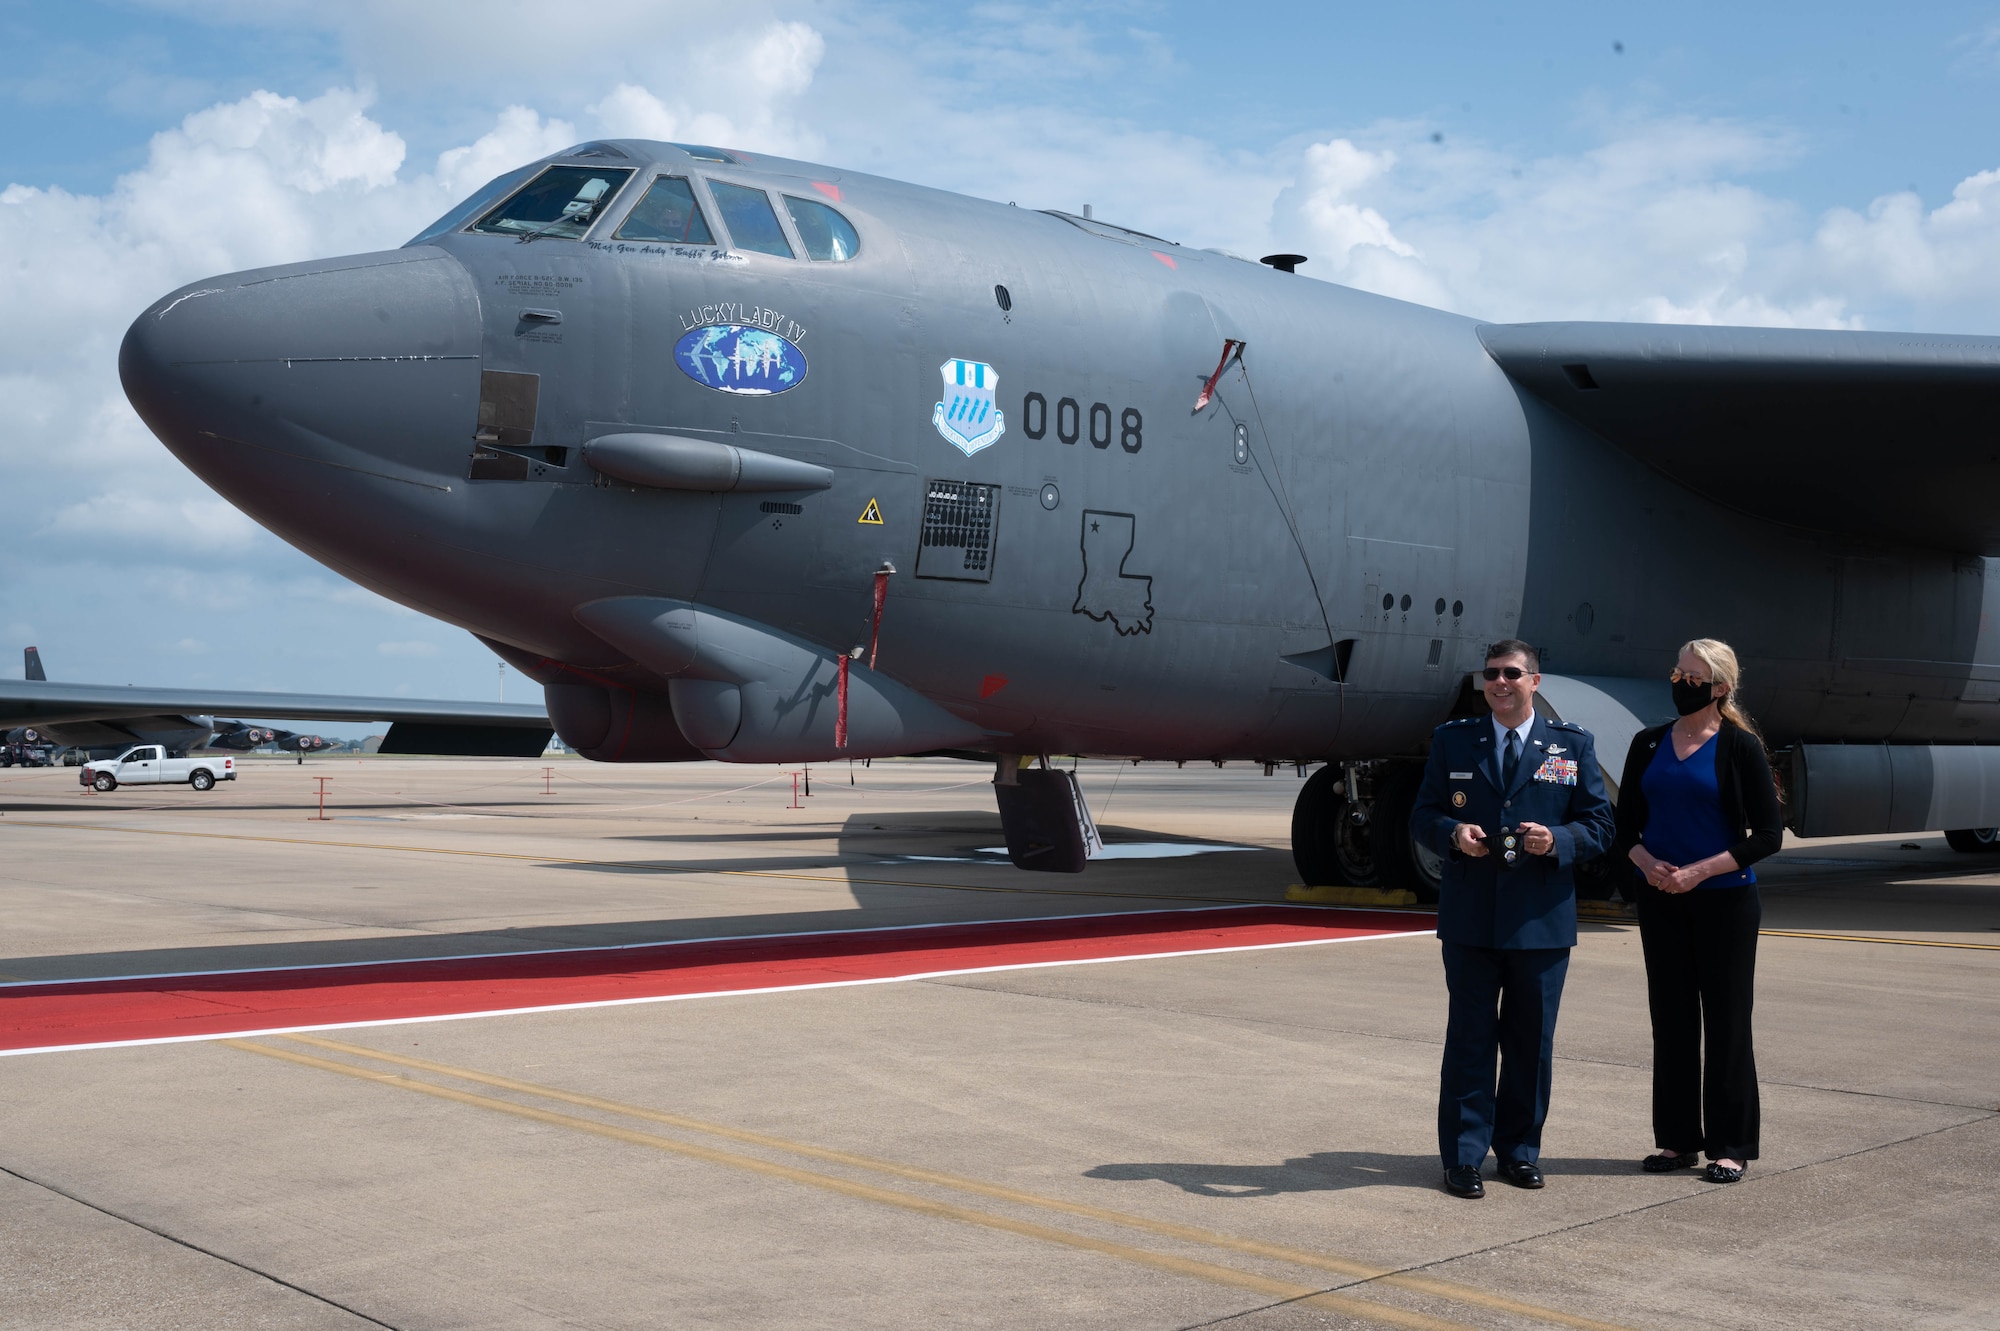 Maj. Gen. Andrew Gebara, incoming 8th Air Force and Joint-Global Strike Operations Center commander, and his wife stand outside of the 8th Air Force commander's B-52H Stratofortress at Barksdale Air Force Base, La., August 16, 2021. Gebara was introduced to his aircraft after he assumed command of the 8th Air Force and J-GSOC. (U.S. Air Force photo by Staff Sgt. Bria Hughes)